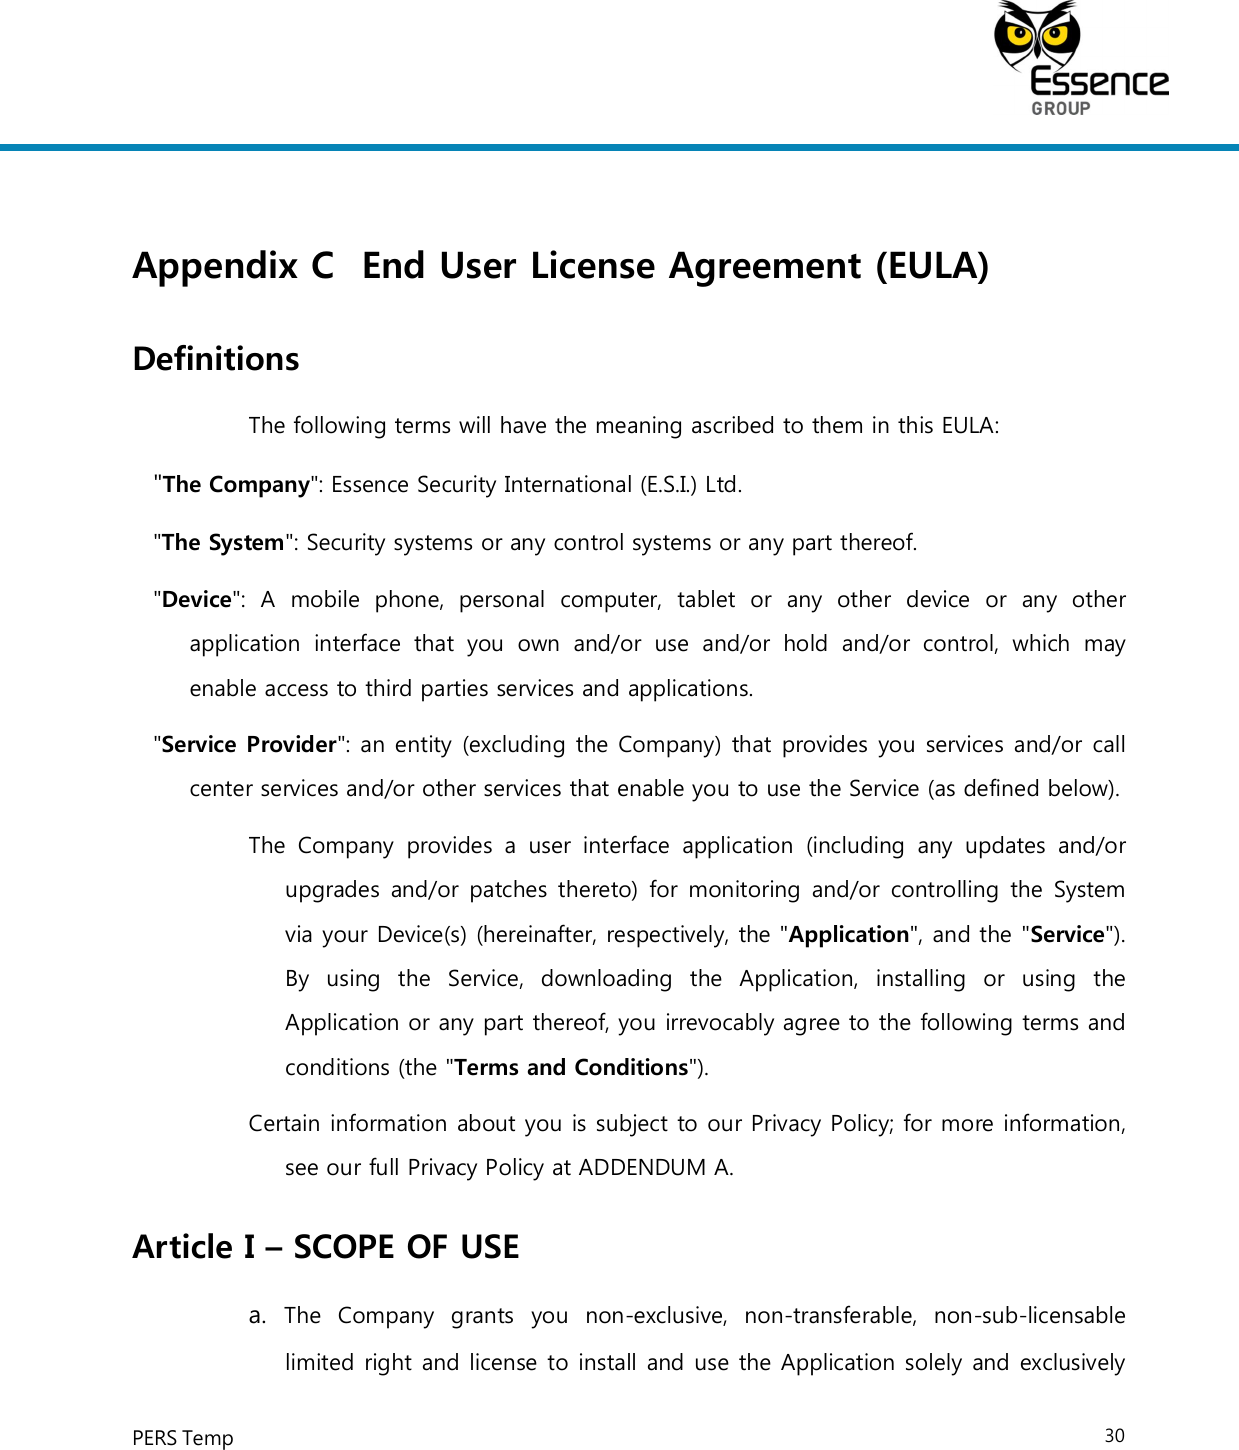     PERS Temp    30  Appendix C End User License Agreement (EULA) Definitions The following terms will have the meaning ascribed to them in this EULA: &quot;The Company&quot;: Essence Security International (E.S.I.) Ltd. &quot;The System&quot;: Security systems or any control systems or any part thereof. &quot;Device&quot;:  A  mobile  phone,  personal  computer,  tablet  or  any  other  device  or  any  other application  interface  that  you  own  and/or  use  and/or  hold  and/or  control,  which  may enable access to third parties services and applications. &quot;Service Provider&quot;: an entity (excluding the Company) that provides you services and/or call center services and/or other services that enable you to use the Service (as defined below). The  Company  provides  a  user  interface  application  (including  any  updates  and/or upgrades  and/or patches thereto)  for monitoring  and/or  controlling  the  System via your Device(s) (hereinafter, respectively, the &quot;Application&quot;, and the &quot;Service&quot;). By  using  the  Service,  downloading  the  Application,  installing  or  using  the Application or any part thereof, you irrevocably agree to the following terms and conditions (the &quot;Terms and Conditions&quot;). Certain information about you is subject to our Privacy Policy; for more information, see our full Privacy Policy at ADDENDUM A. Article I – SCOPE OF USE a.  The  Company  grants  you  non-exclusive,  non-transferable,  non-sub-licensable limited right and license to install and use the Application solely and exclusively 